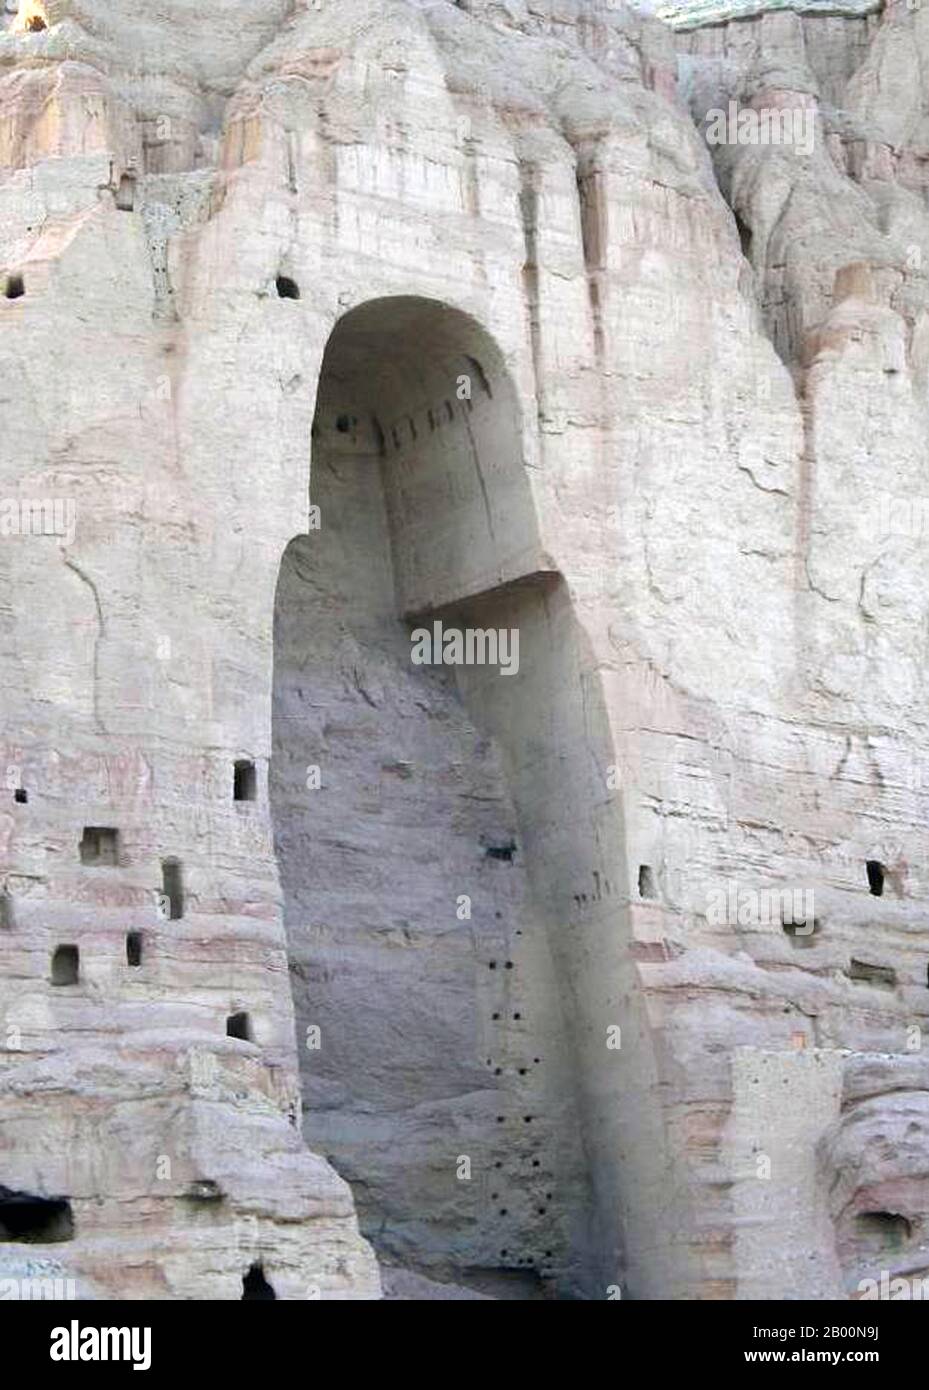 Afghanistan: Bamiyan Buddha cave in 2005 after destruction of Buddha image by Taliban in 2001.  The Buddhas of Bamiyan were two 6th century monumental statues of standing buddhas carved into the side of a cliff in the Bamiyan valley in the Hazarajat region of central Afghanistan, situated 230 km (143 miles) northwest of Kabul at an altitude of 2,500 meters (8,202 ft).  Built in 507 CE, the larger in 554 CE, the statues represented the classic blended style of Gandhara art. The main bodies were hewn directly from the sandstone cliffs. Stock Photo